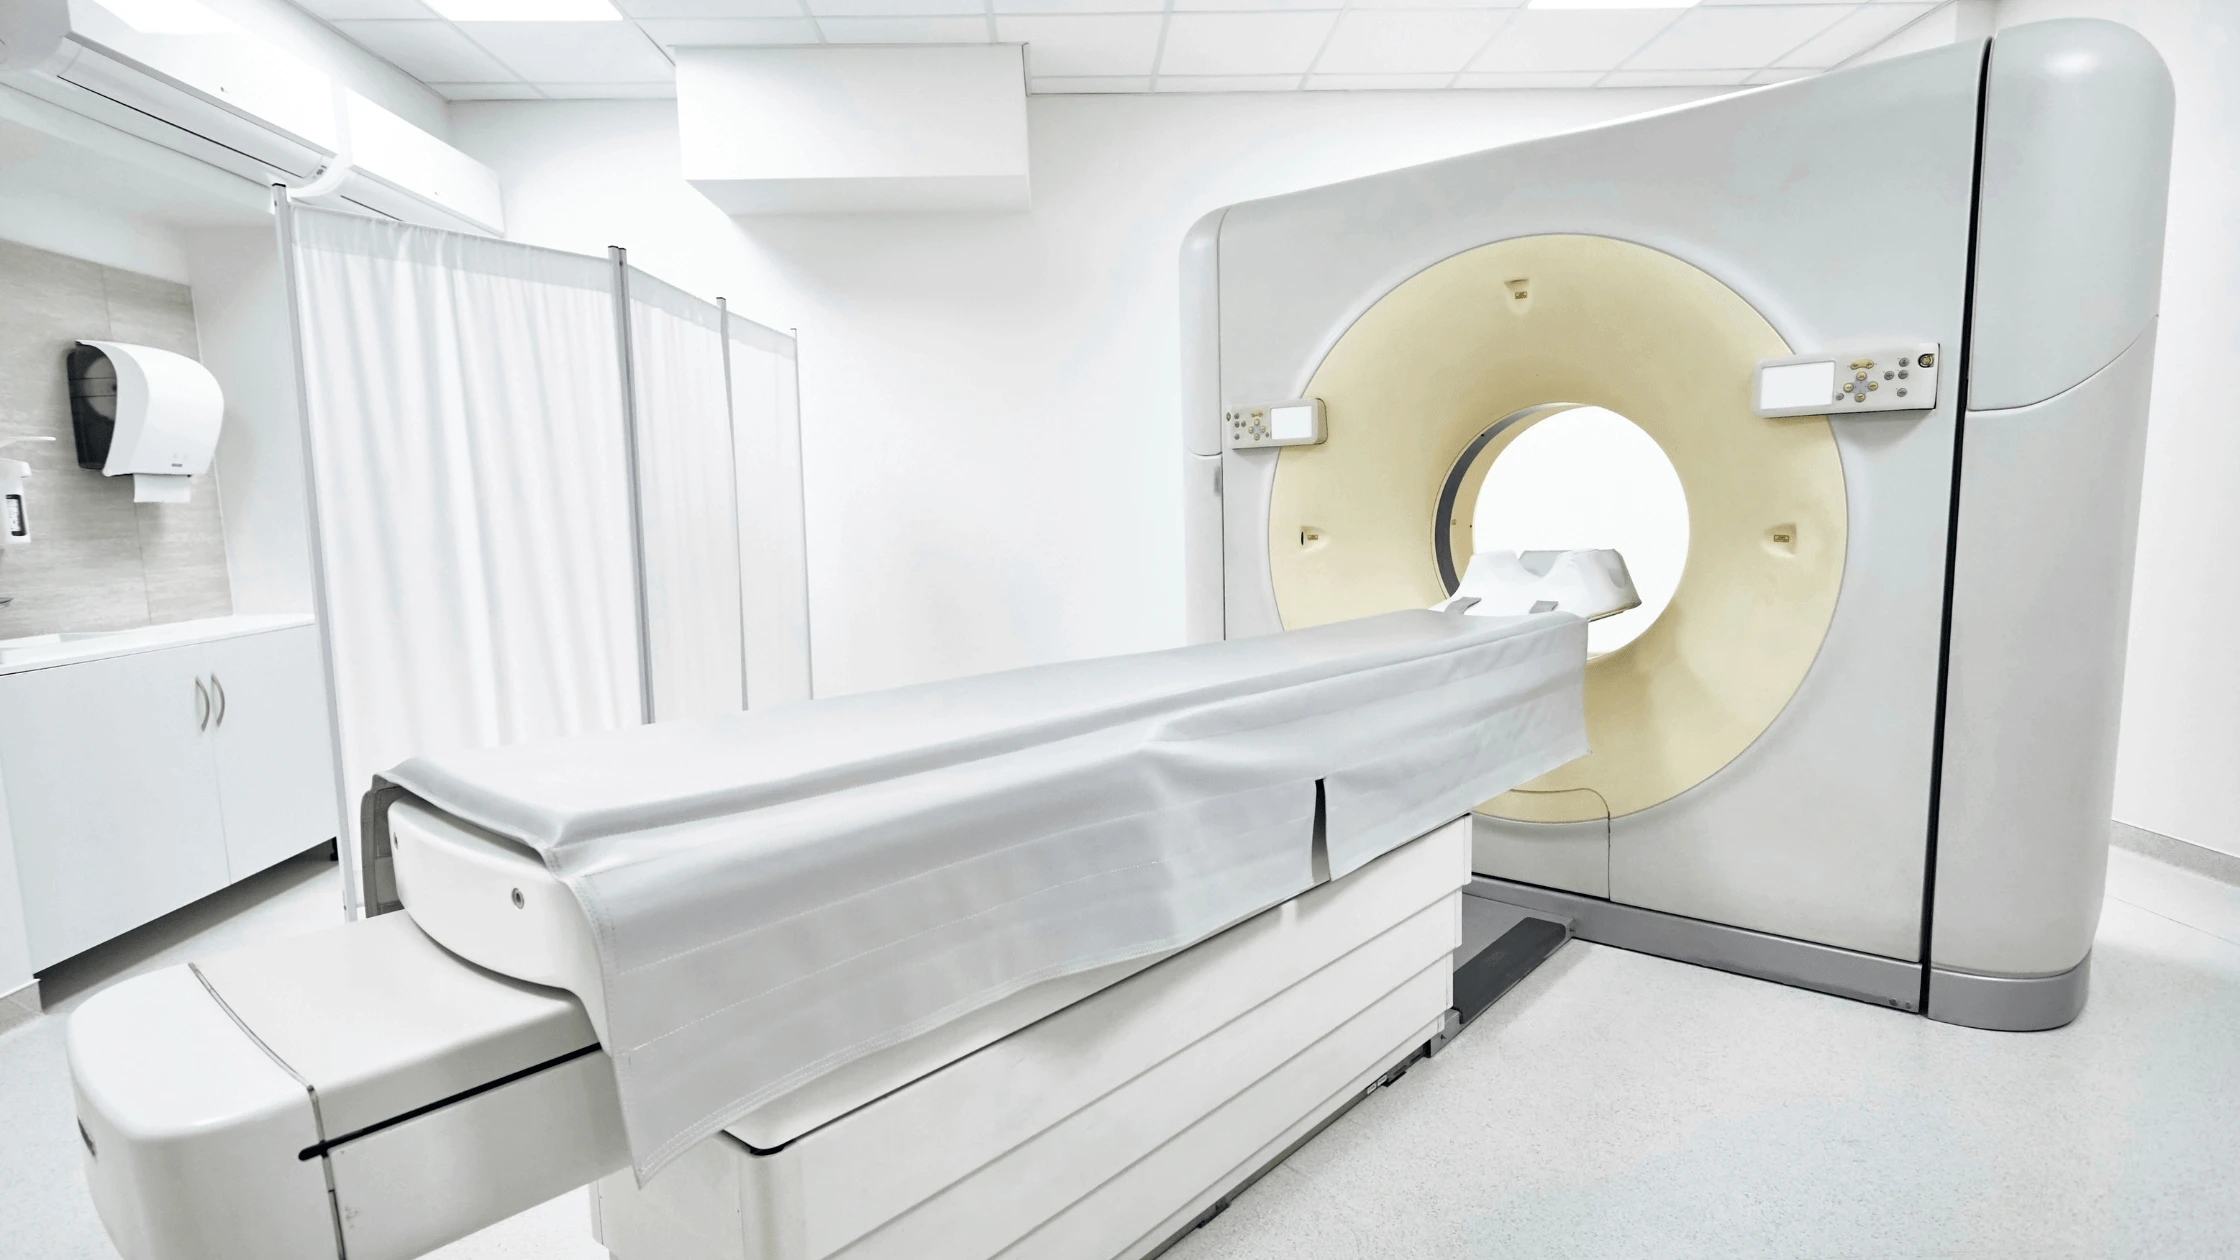 How to sell a CT Scanner